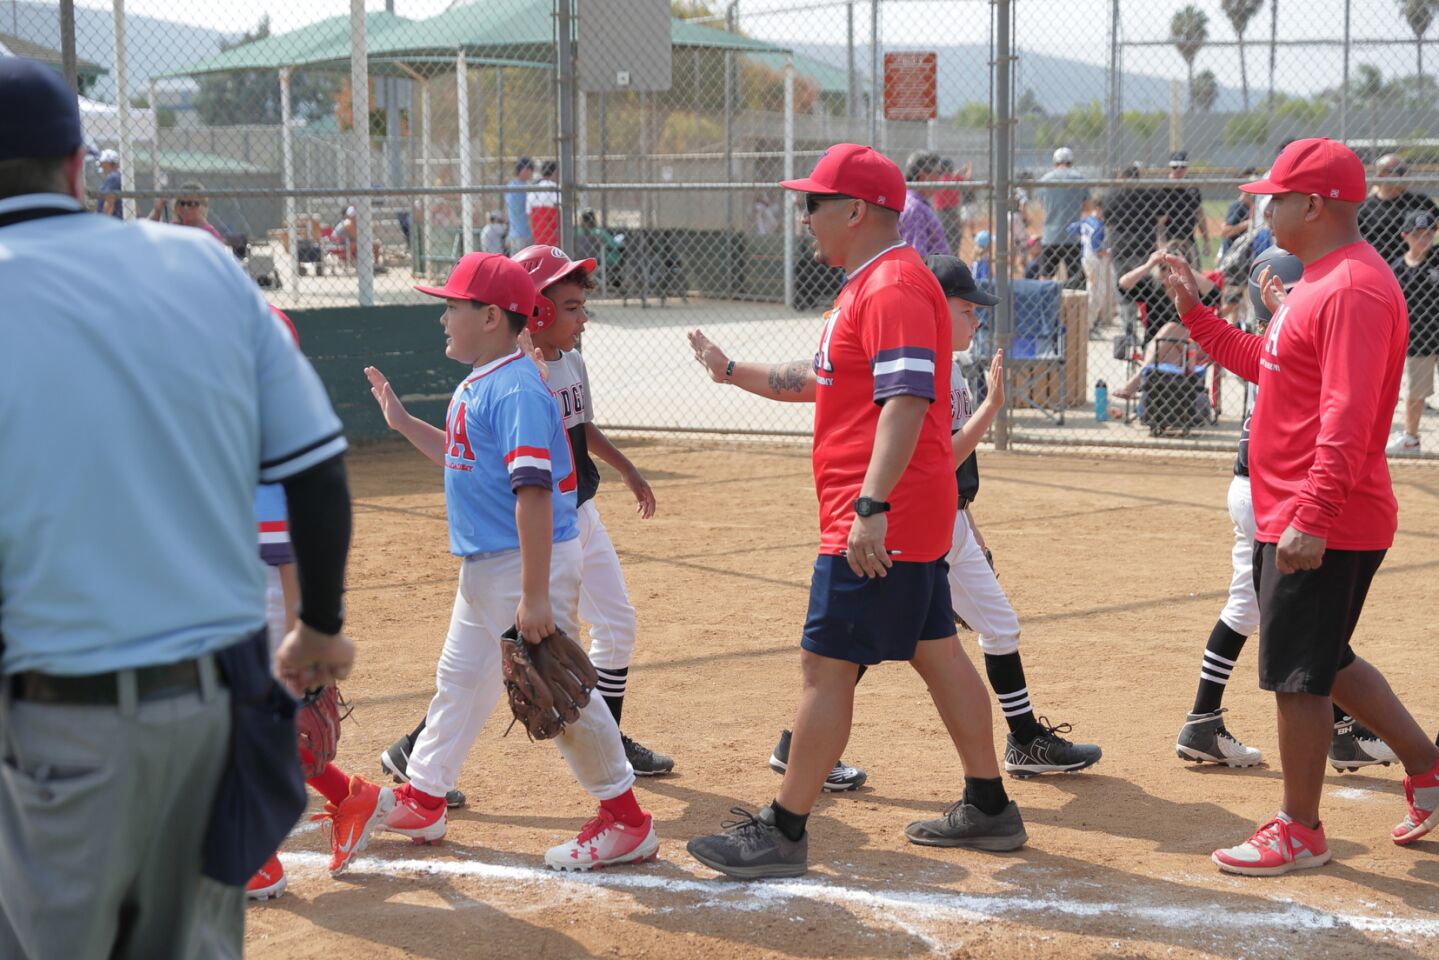 Yuma Baseball Academy and Encinitas Edge congratulate each other on a game well-played.